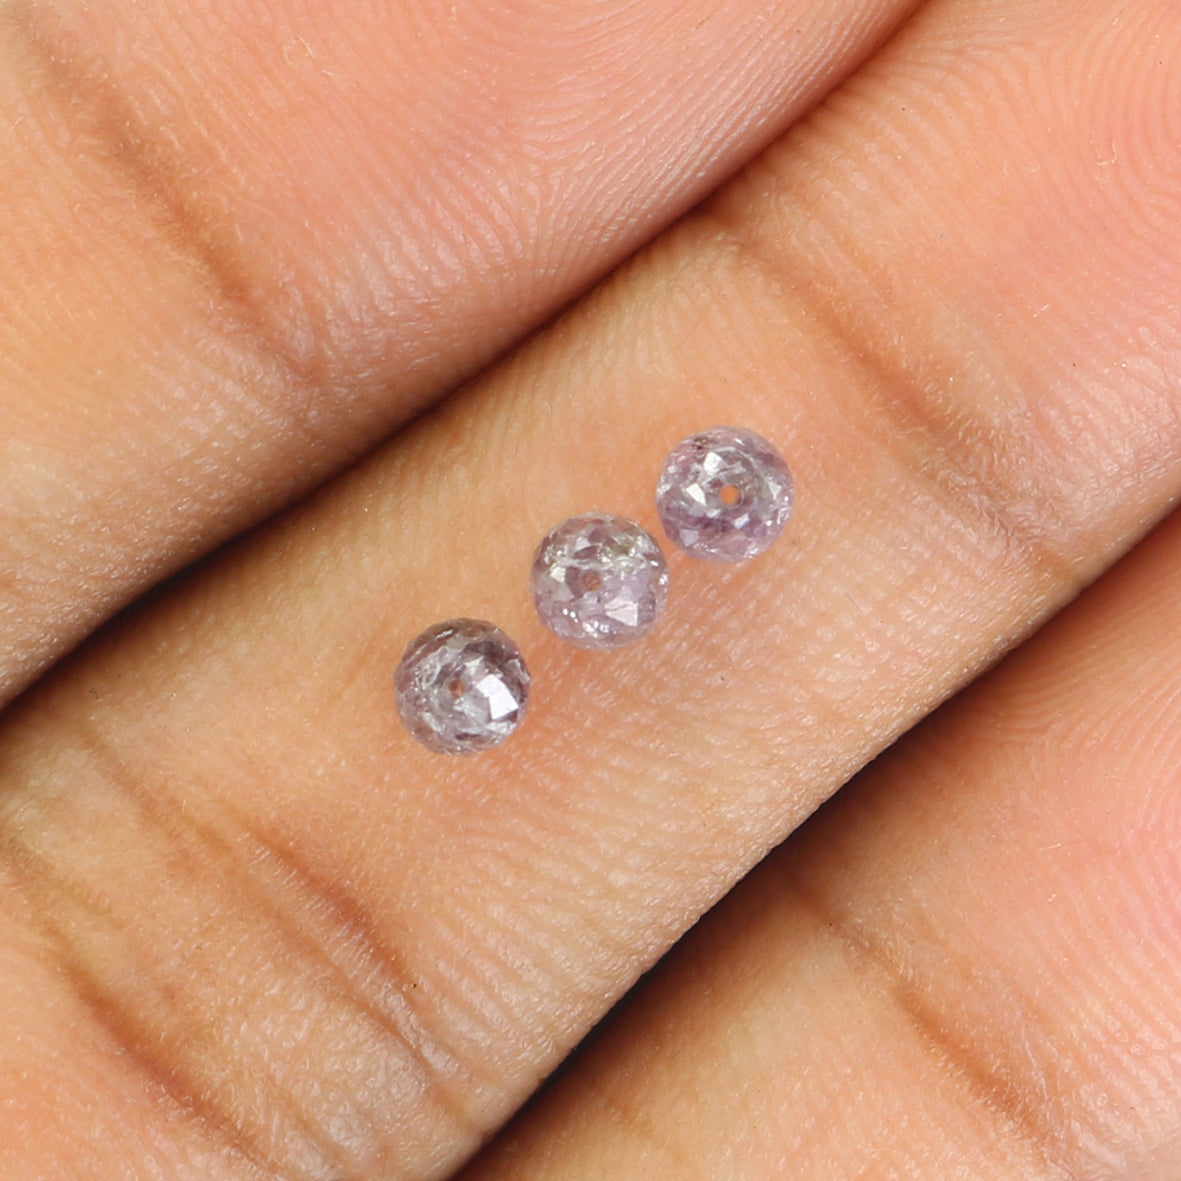 0.99 CT Faceted Bead Diamond, Natural Loose Diamond, Pink Bead Diamond, Faceted Diamond Bead, Beads Loose Diamond, Beads For Necklace L9804